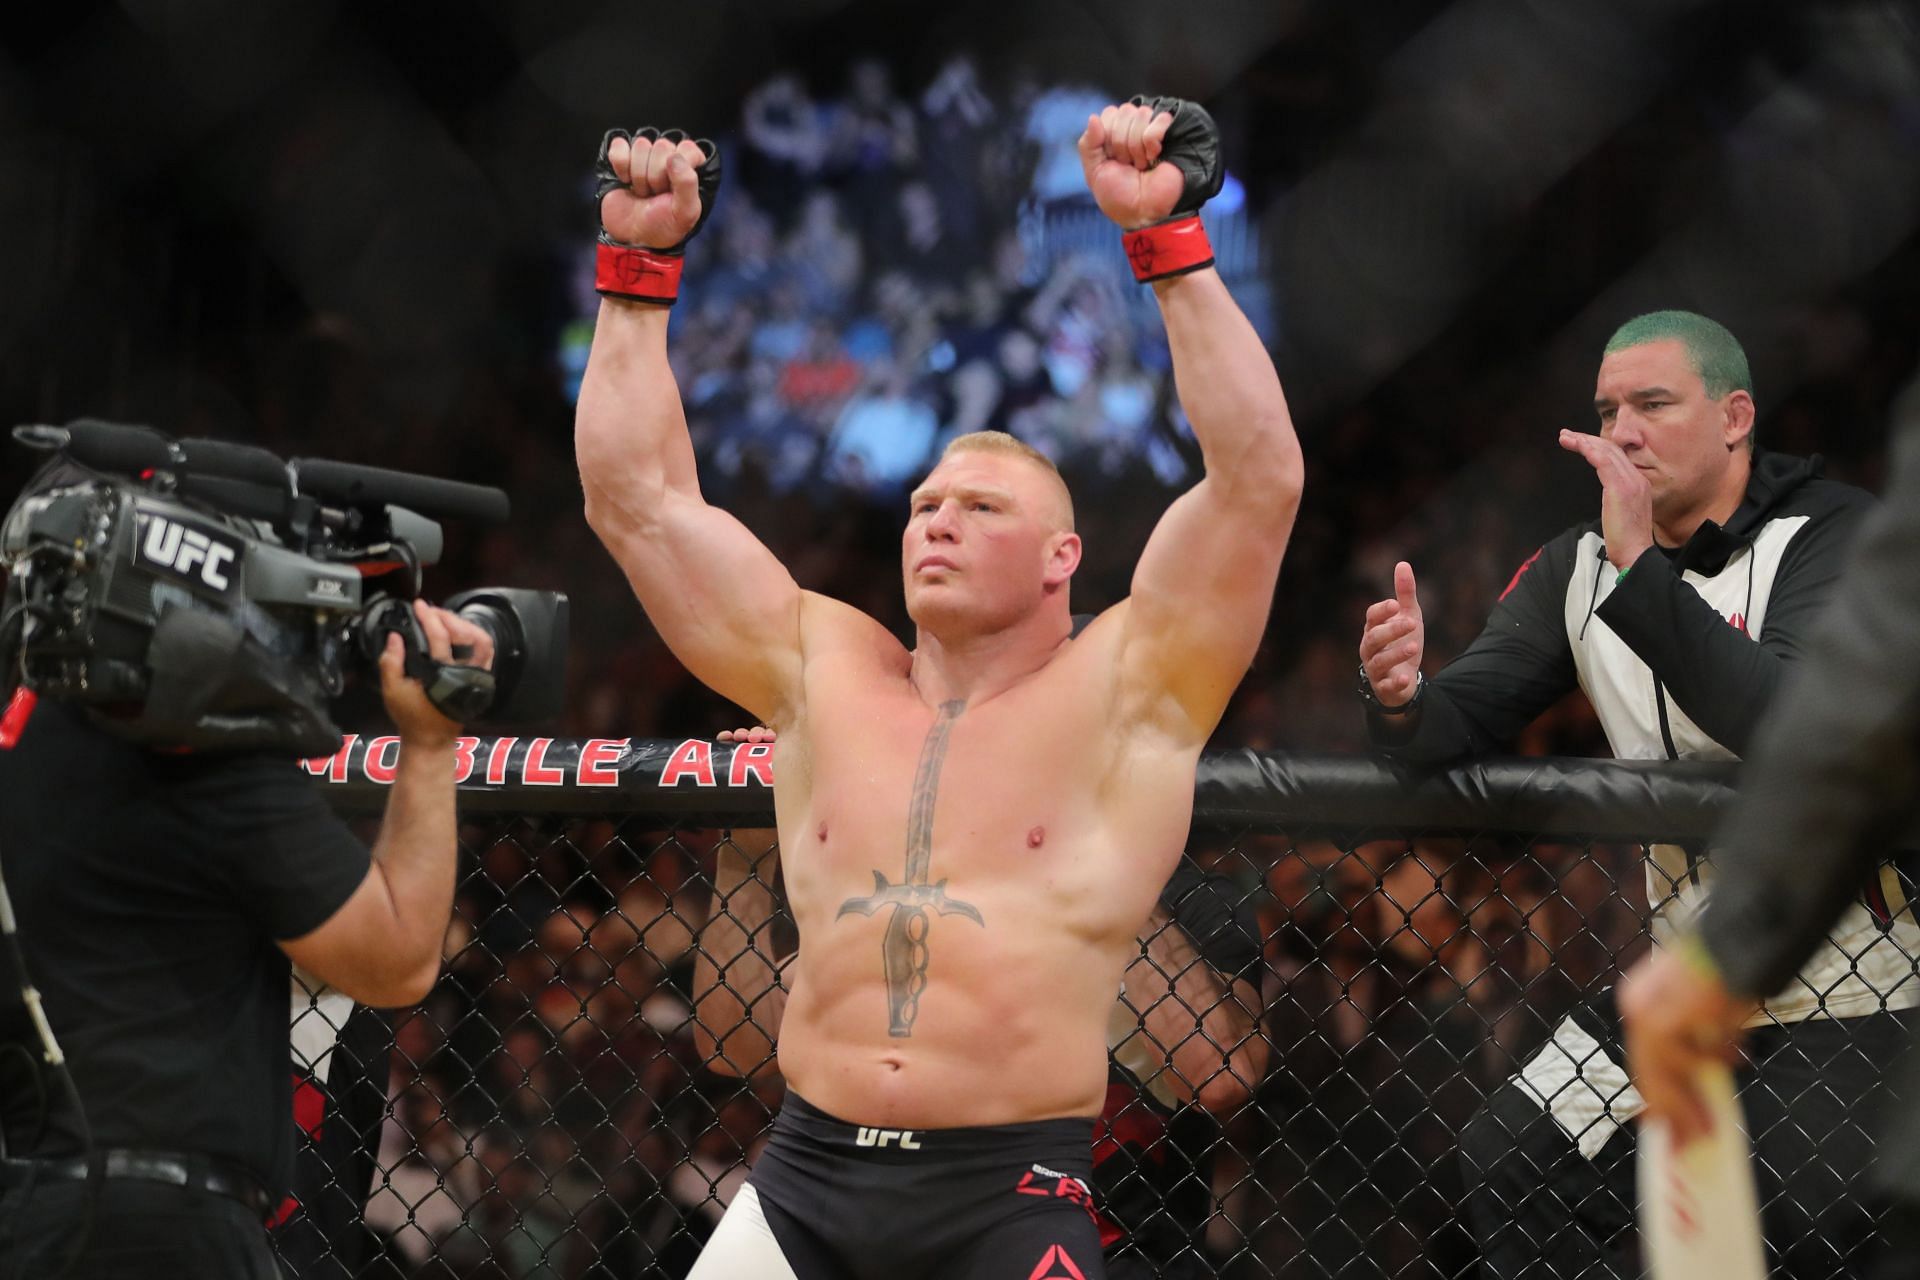 Brock Lesnar participates in a fight at UFC 200